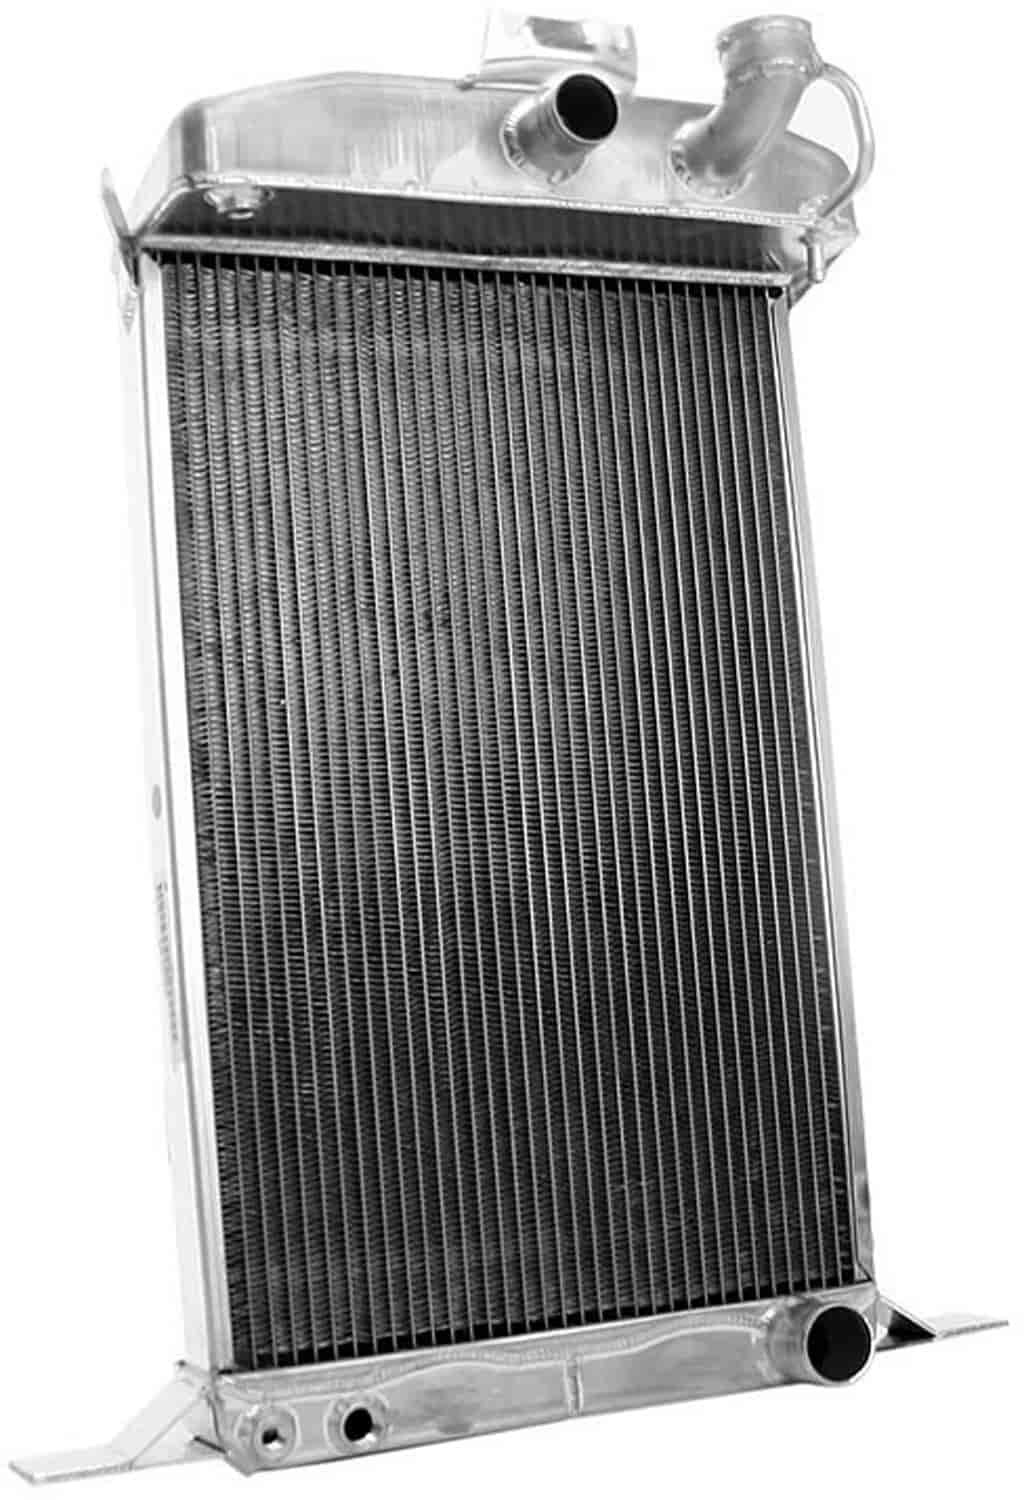 ExactFit Radiator for 1937-1938 Ford with Early GM Engine